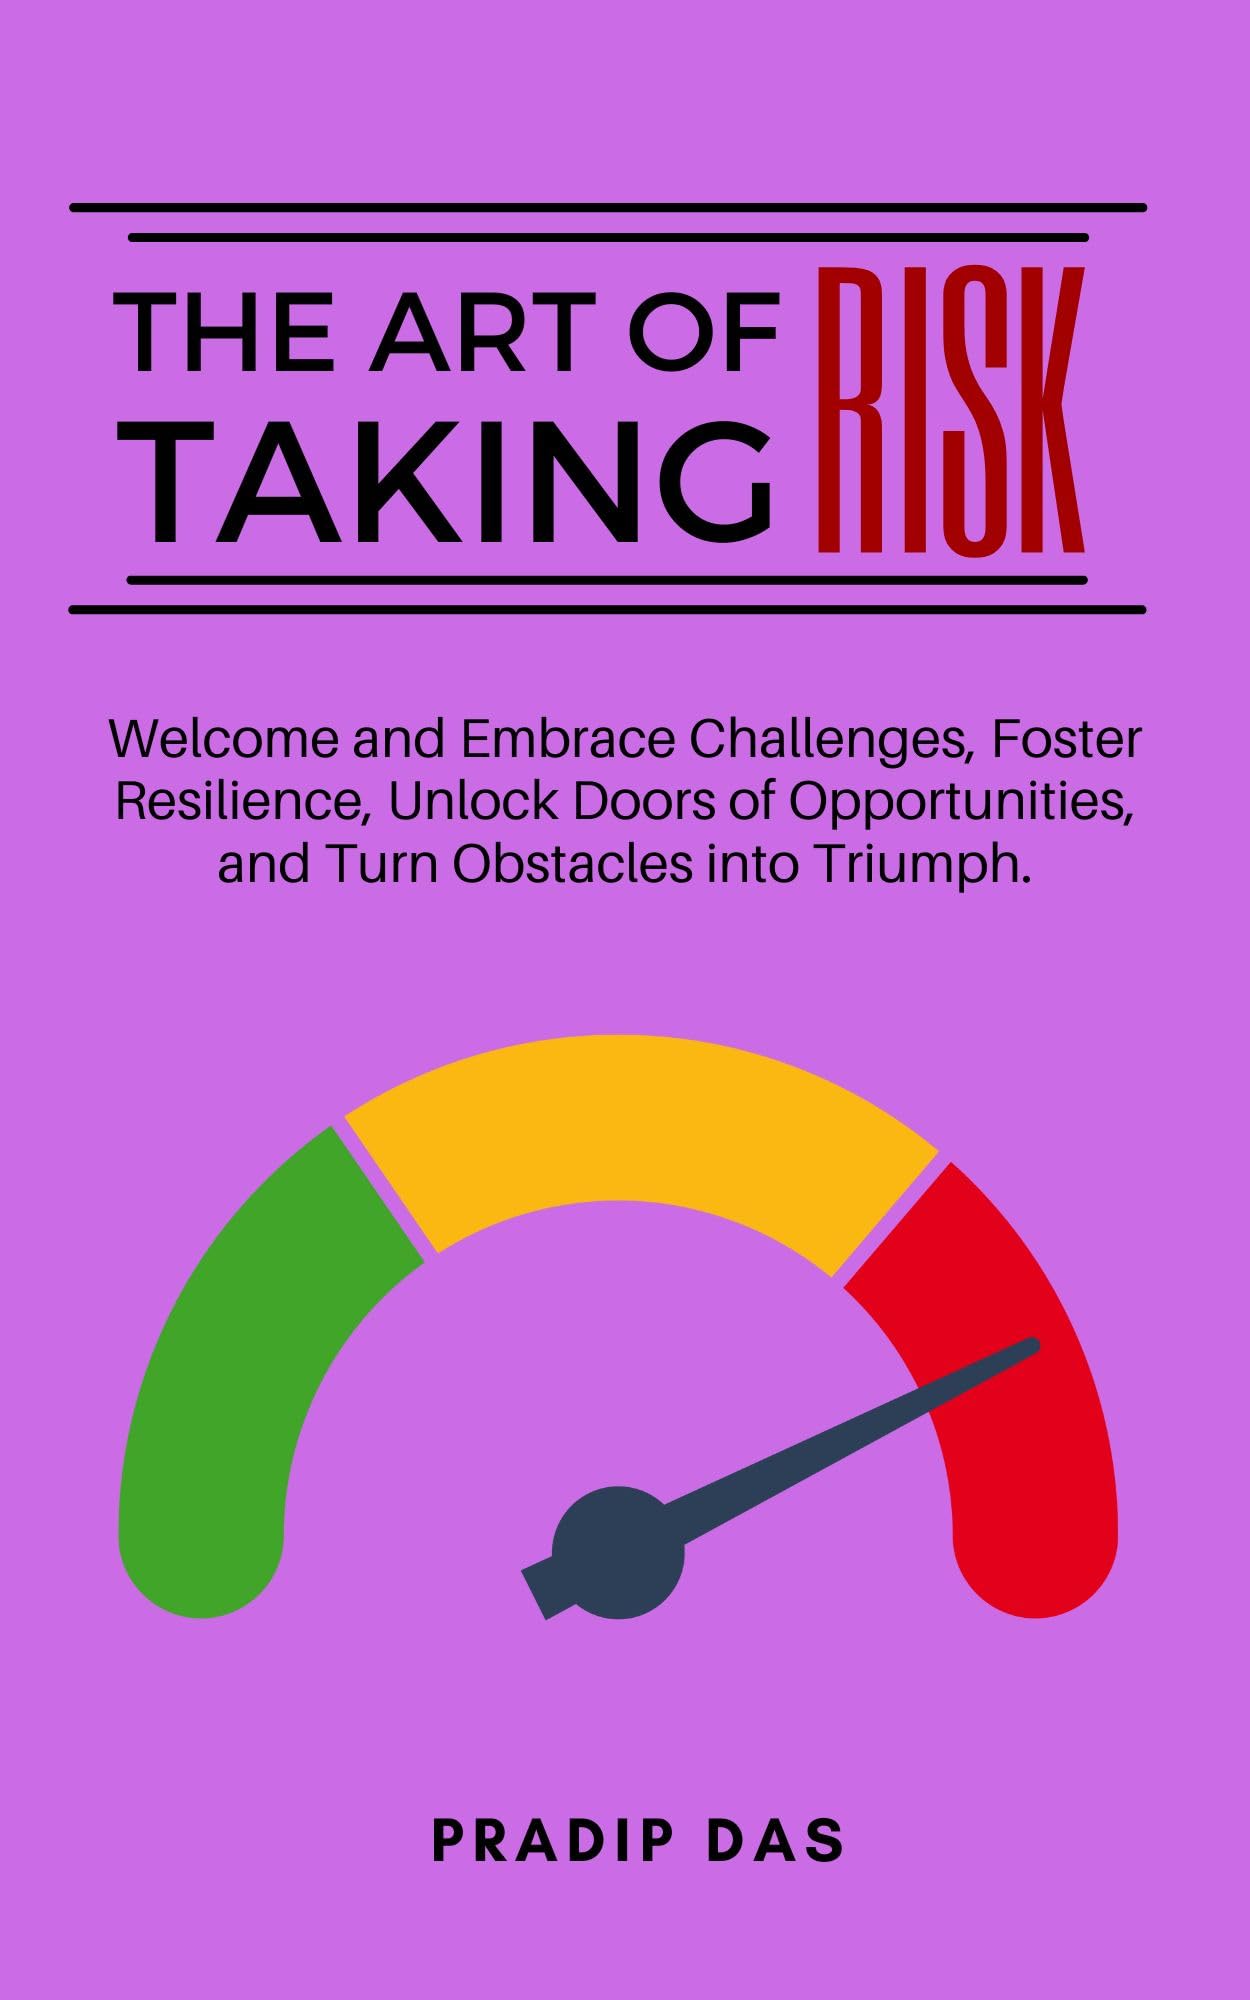 The Art of Taking Risk: Welcome and Embrace Challenges, Foster Resilience, Unlock Doors of Opportunities, and Turn Obstacles into Triumph. (The Art of Living Book 2)